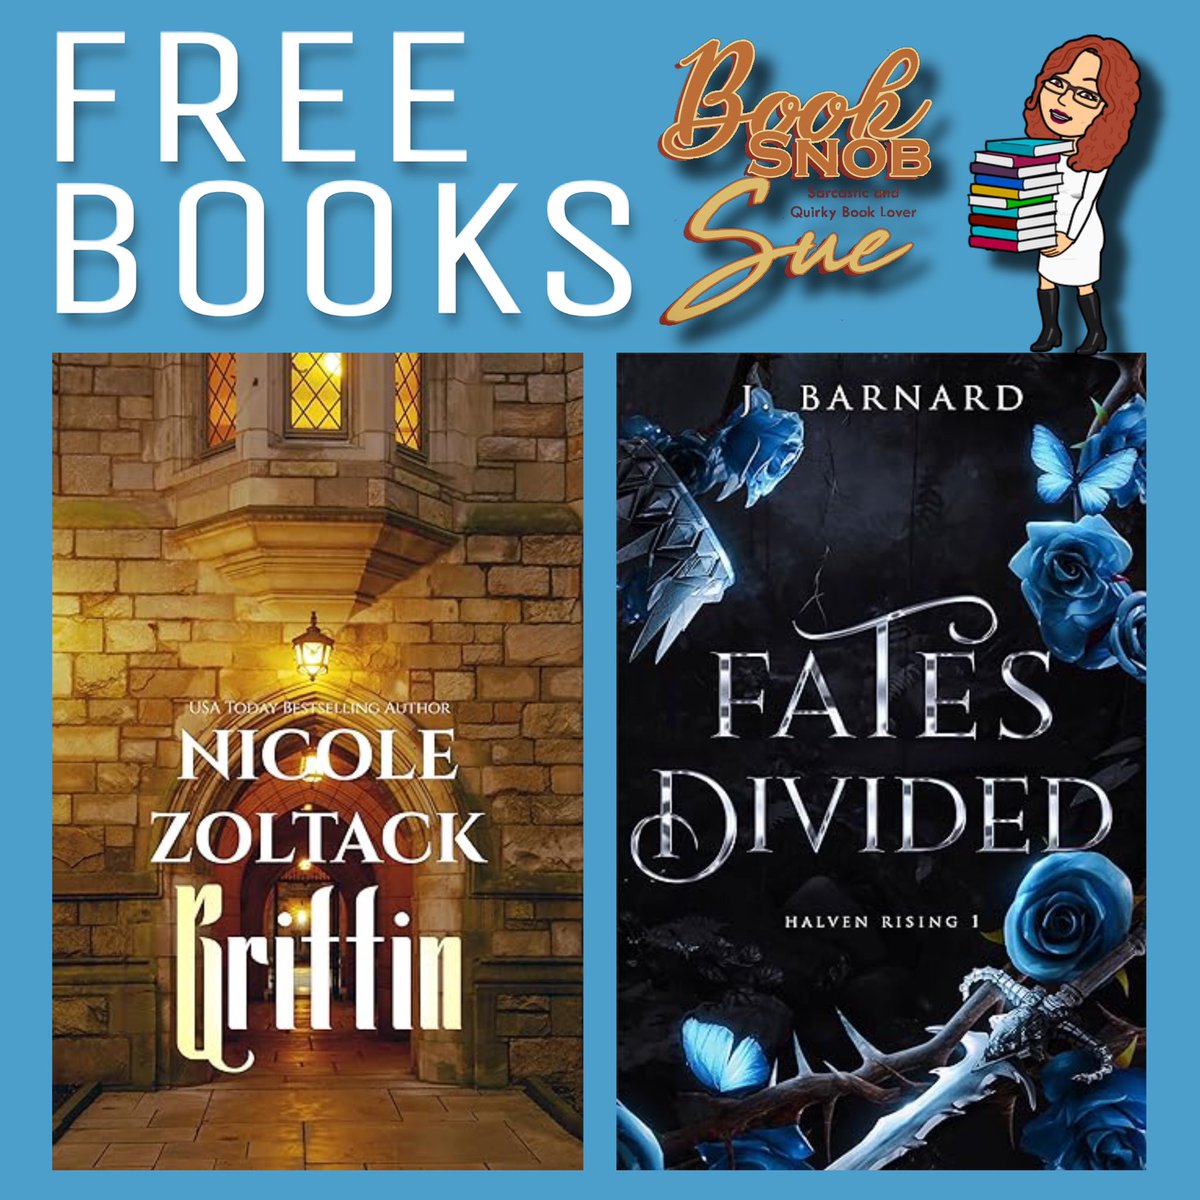 #FreeBooks #LimitedTime #ad Griffin by @NicoleZoltack Monster Hunter Rejected Magical Mates Amazon amzn.to/3xsH7PI B&N Apple Kobo books2read.com/u/3GP20r Fates Divided by J. Barnard Halven Rising Amazon amzn.to/3PX6WOp B&N Apple Kobo books2read.com/u/4jM2kl